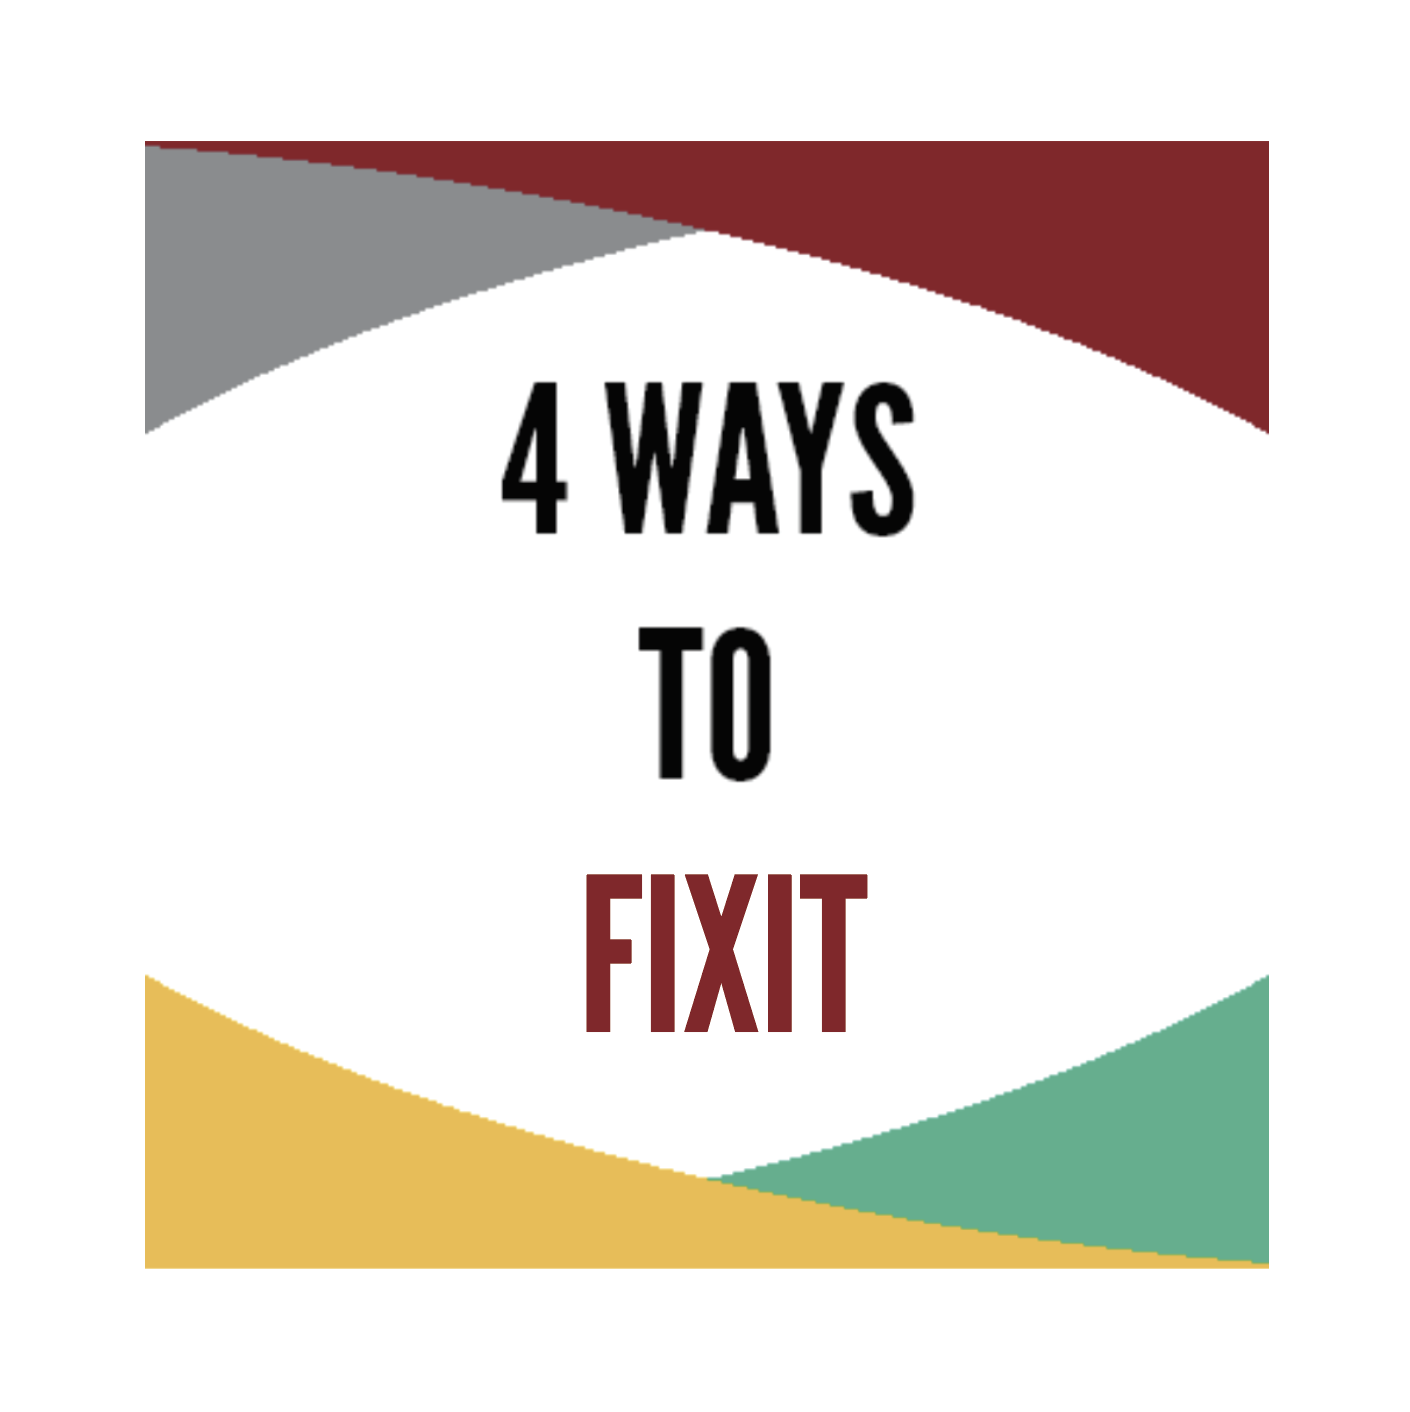 4-way-to-fixit.png